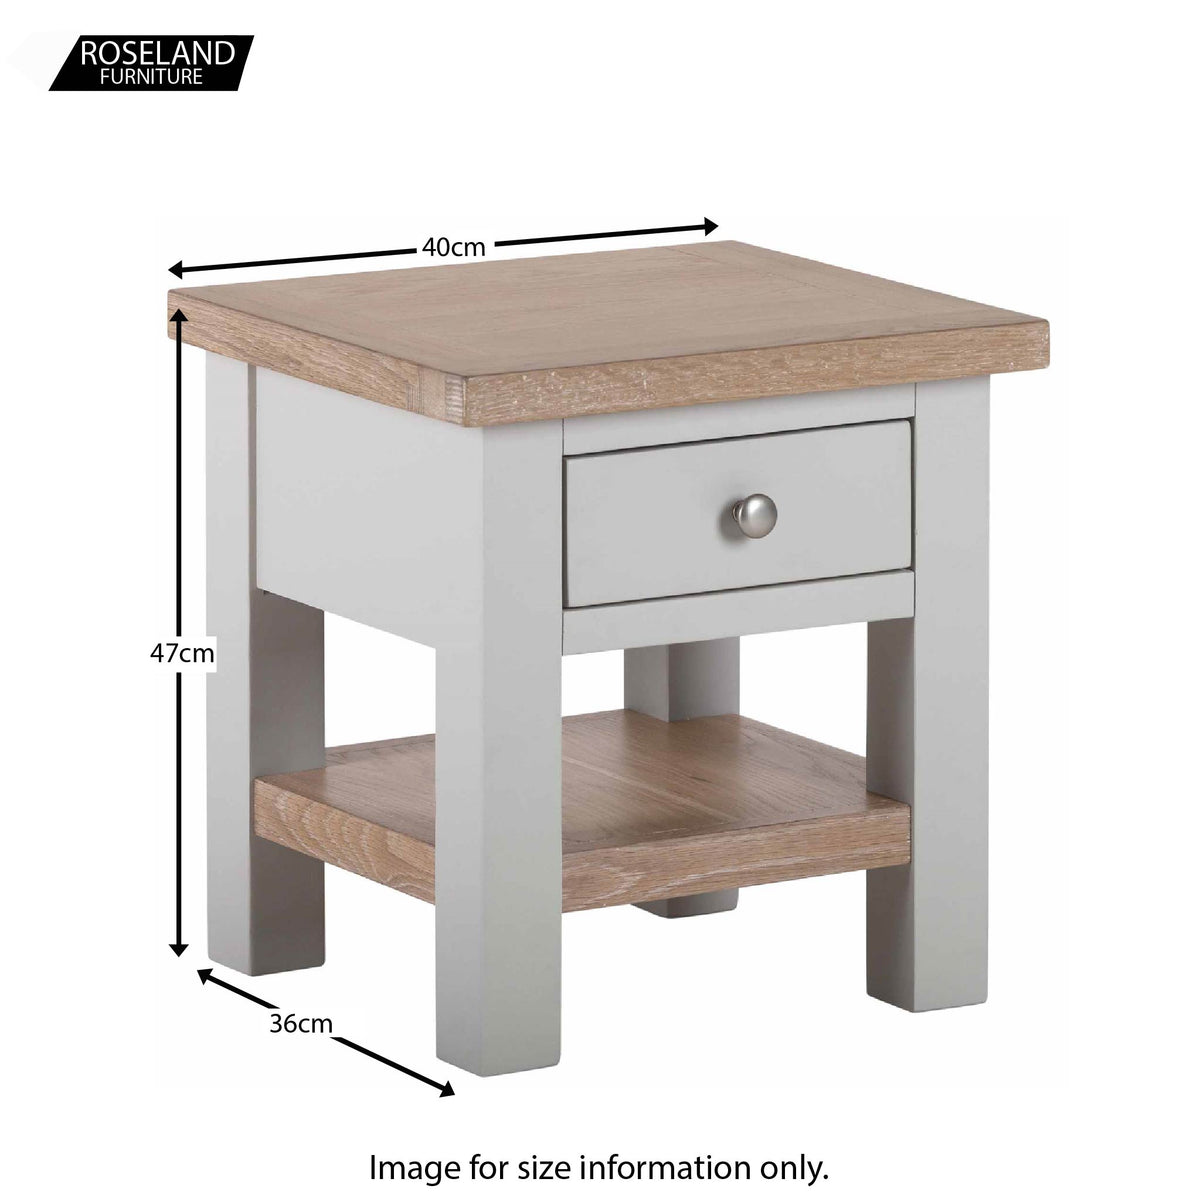 Dimensions for Charlestown Grey Lamp Table with Oak Top from Roseland Furniture